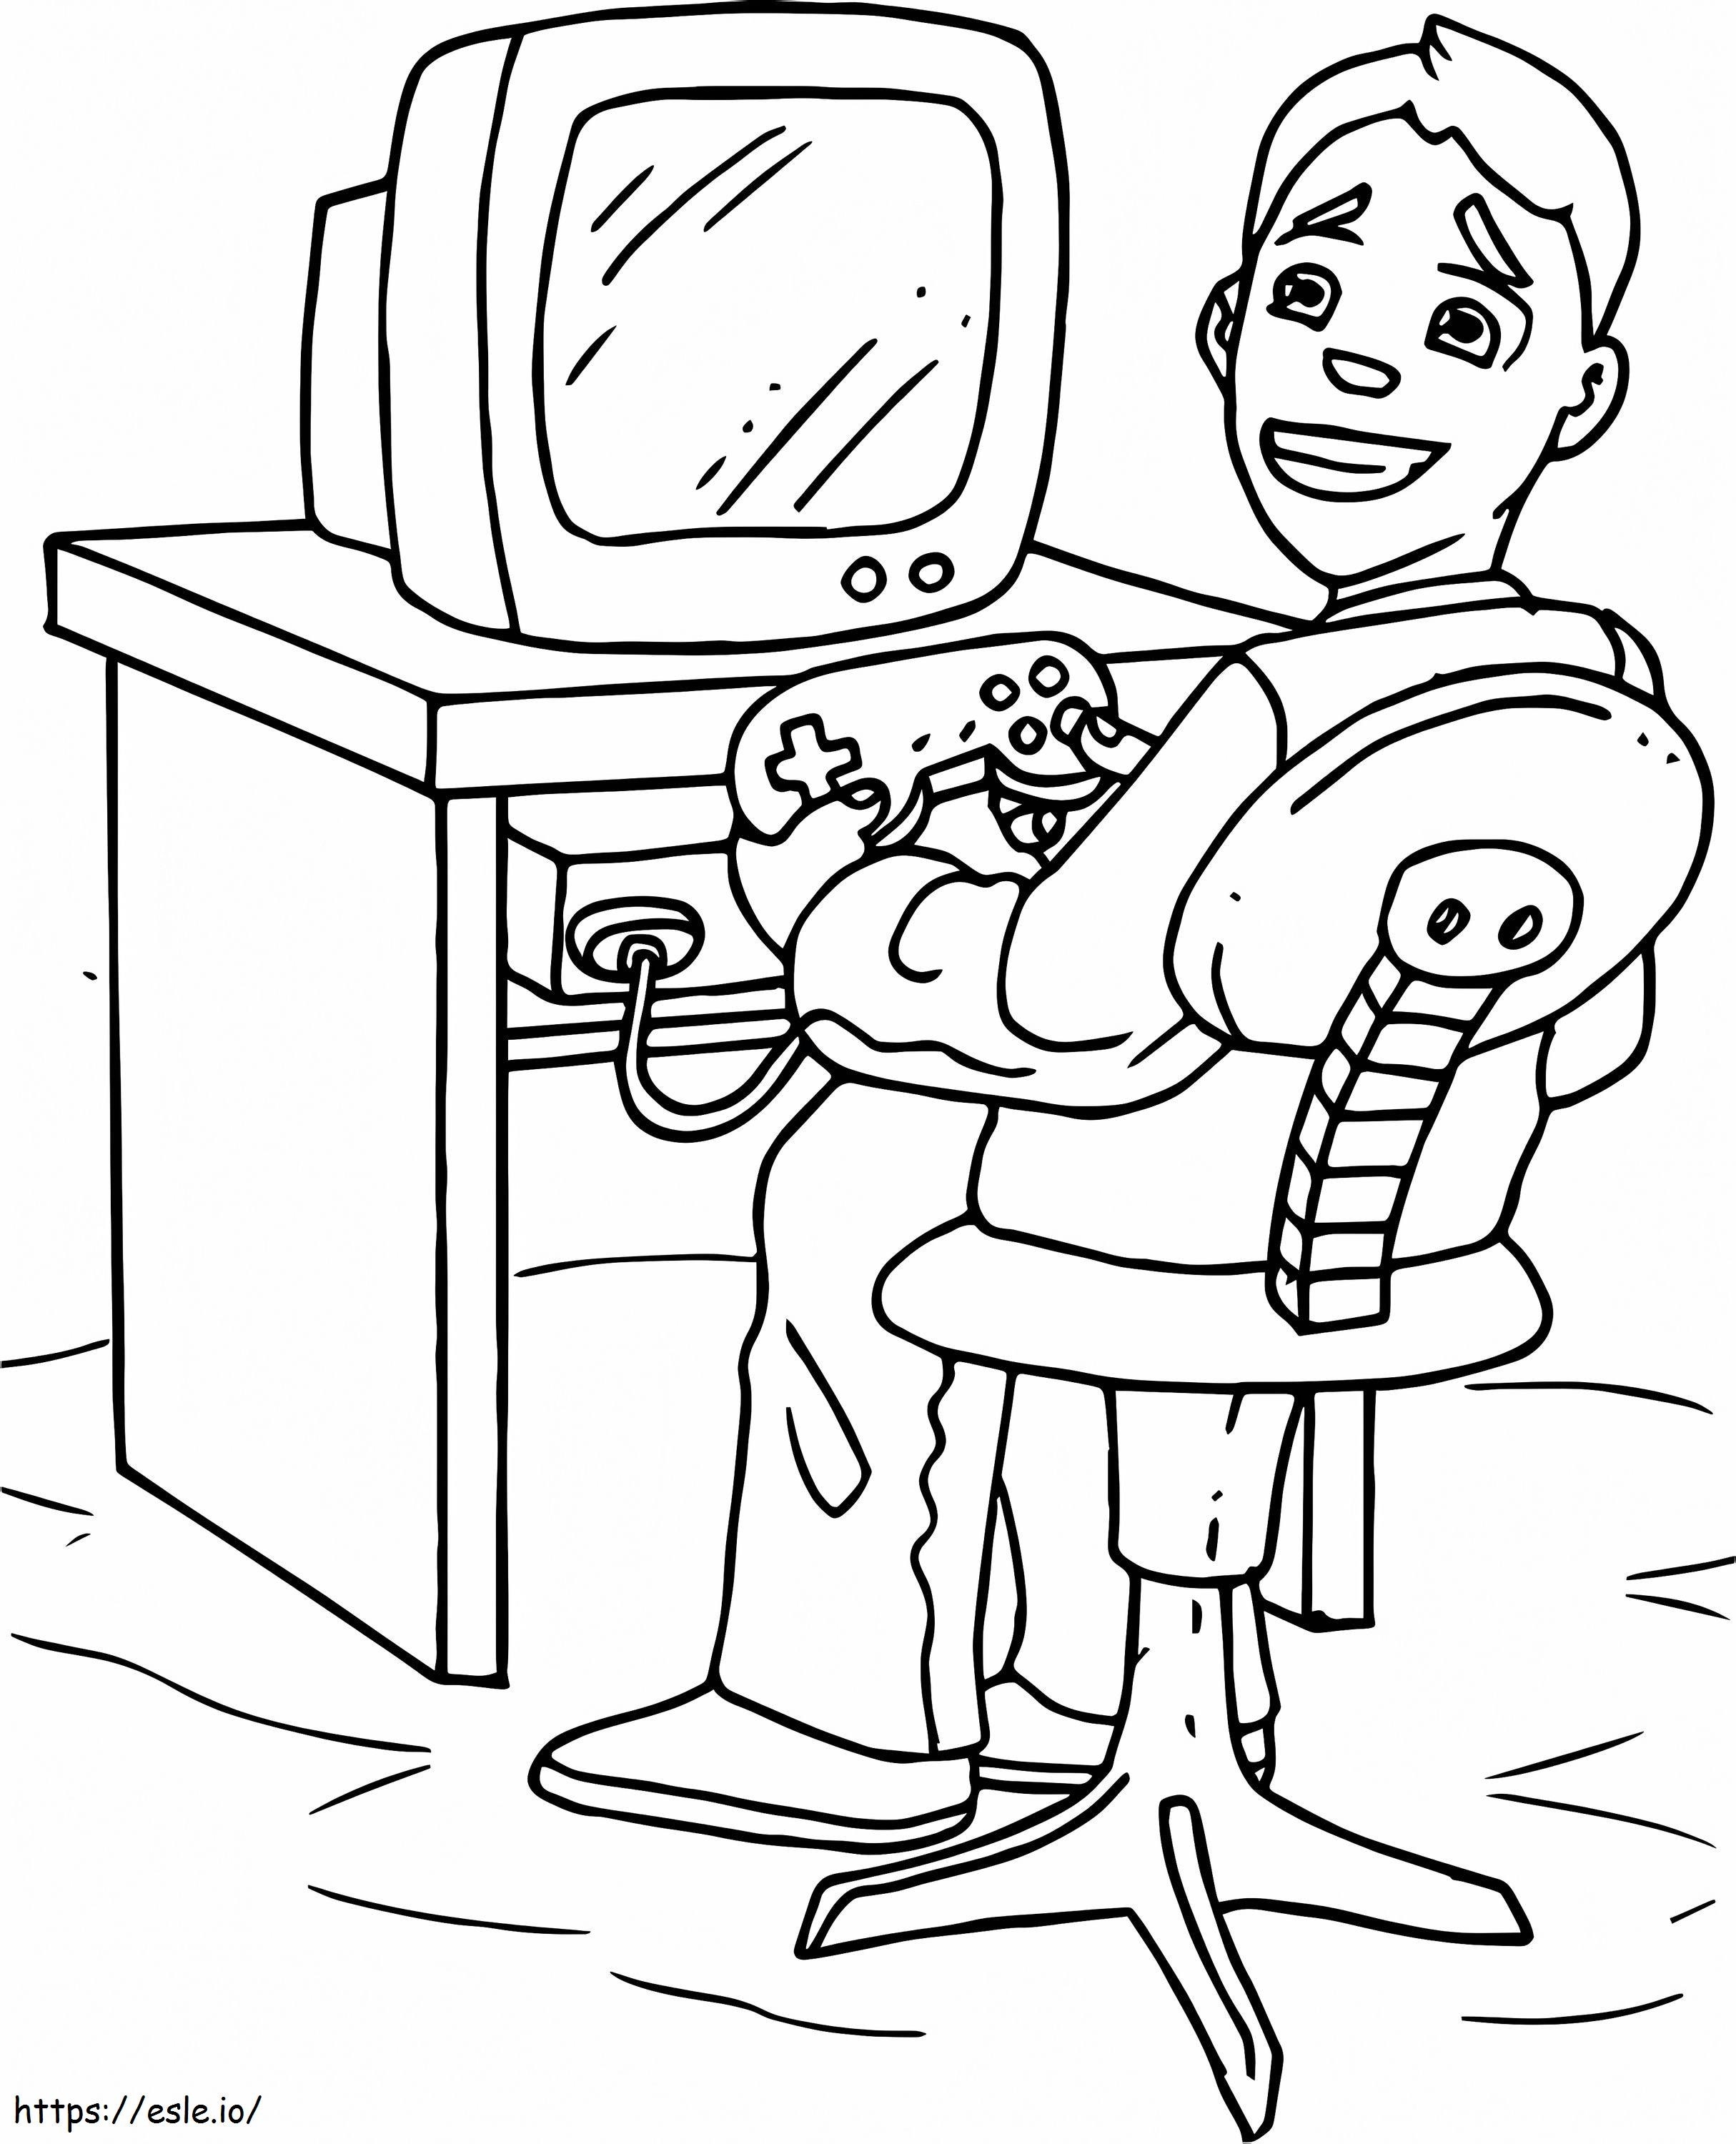 1545616625_Video Game Home Sketch coloring page